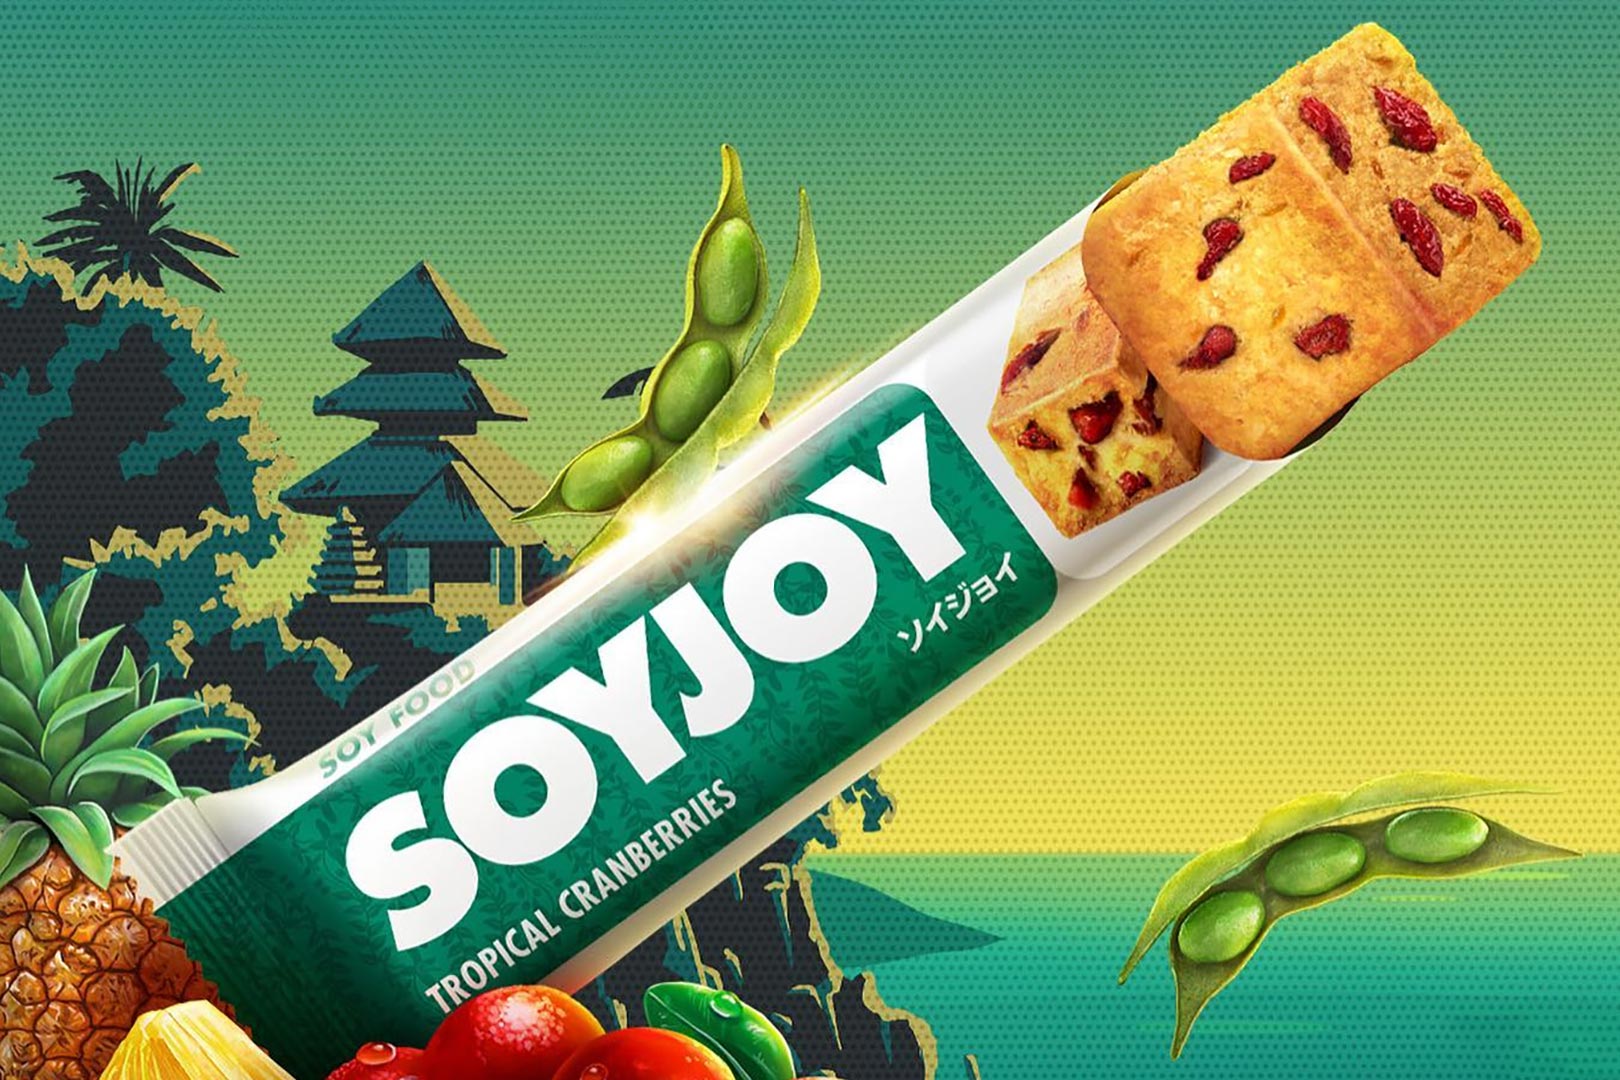 Tropical Cranberries Soyjoy Protein Bar